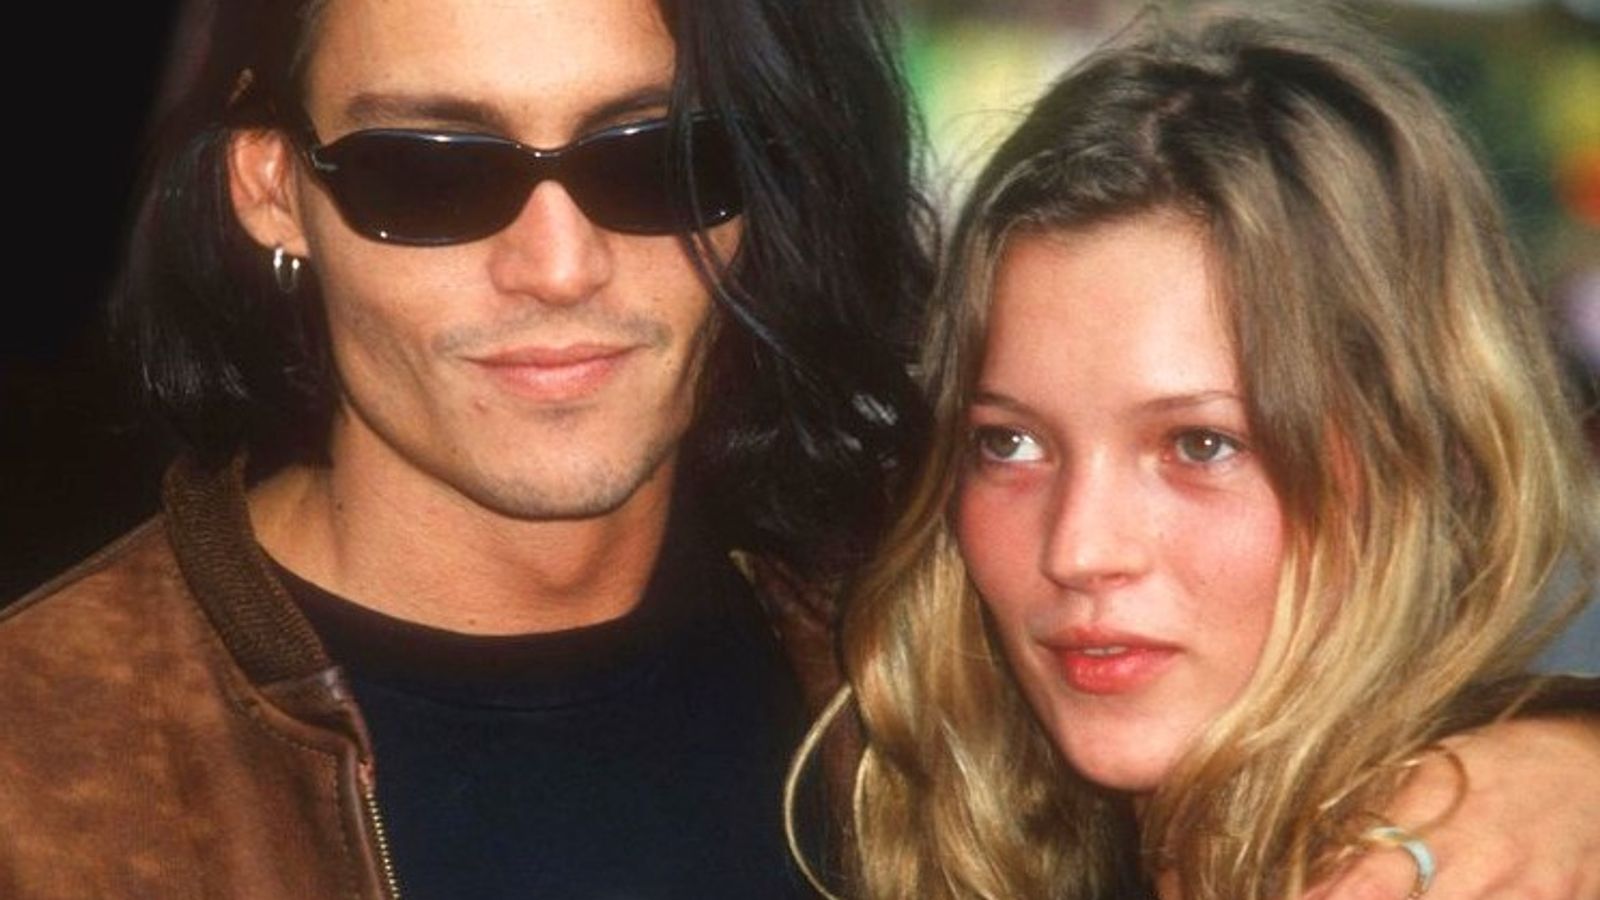 Johnny Depp And Kate Moss Concert